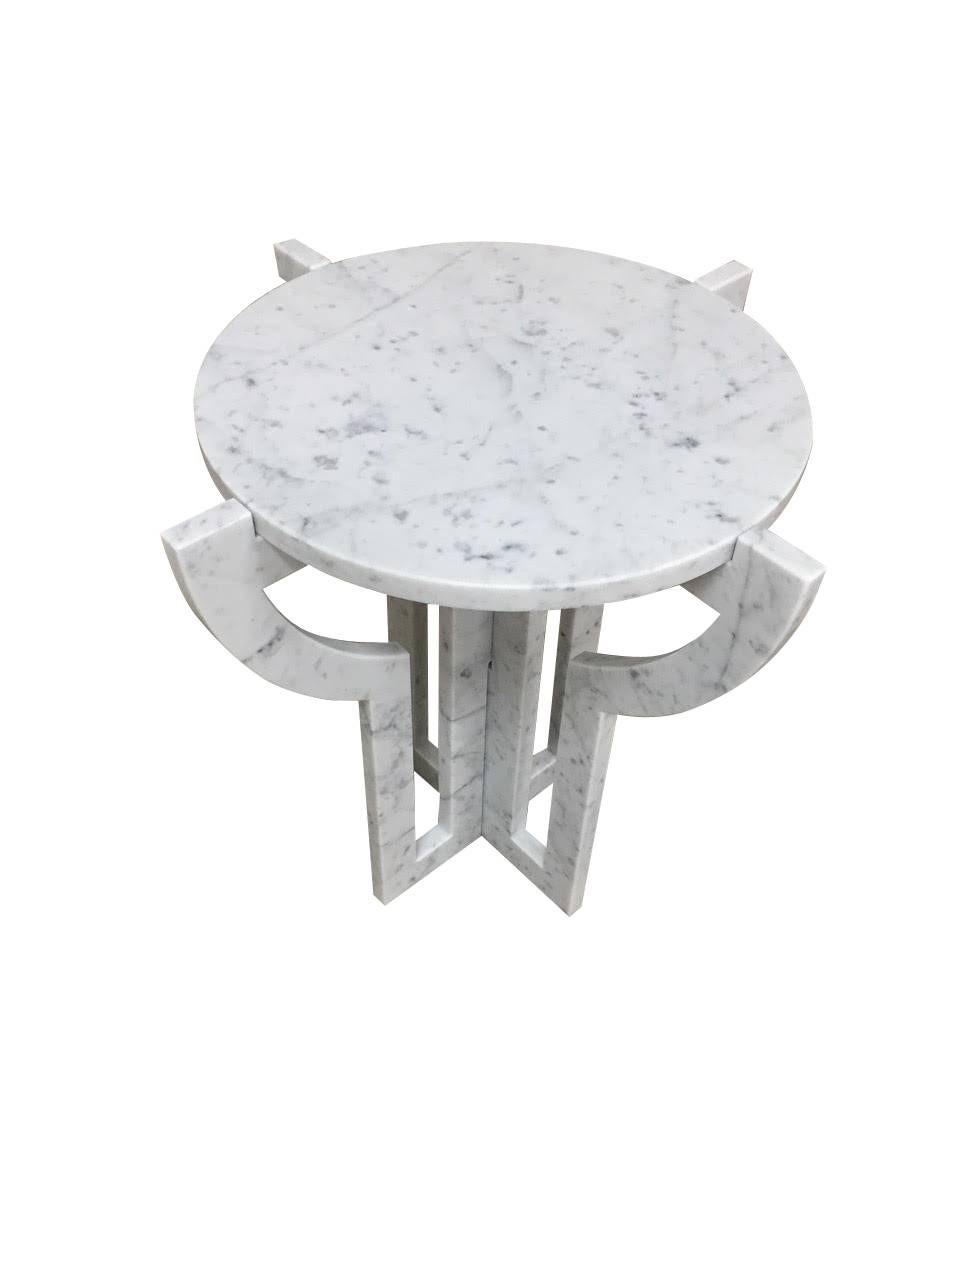 Italian White Carrara Marble Cocktail Table, Contemporary In New Condition For Sale In New York, NY